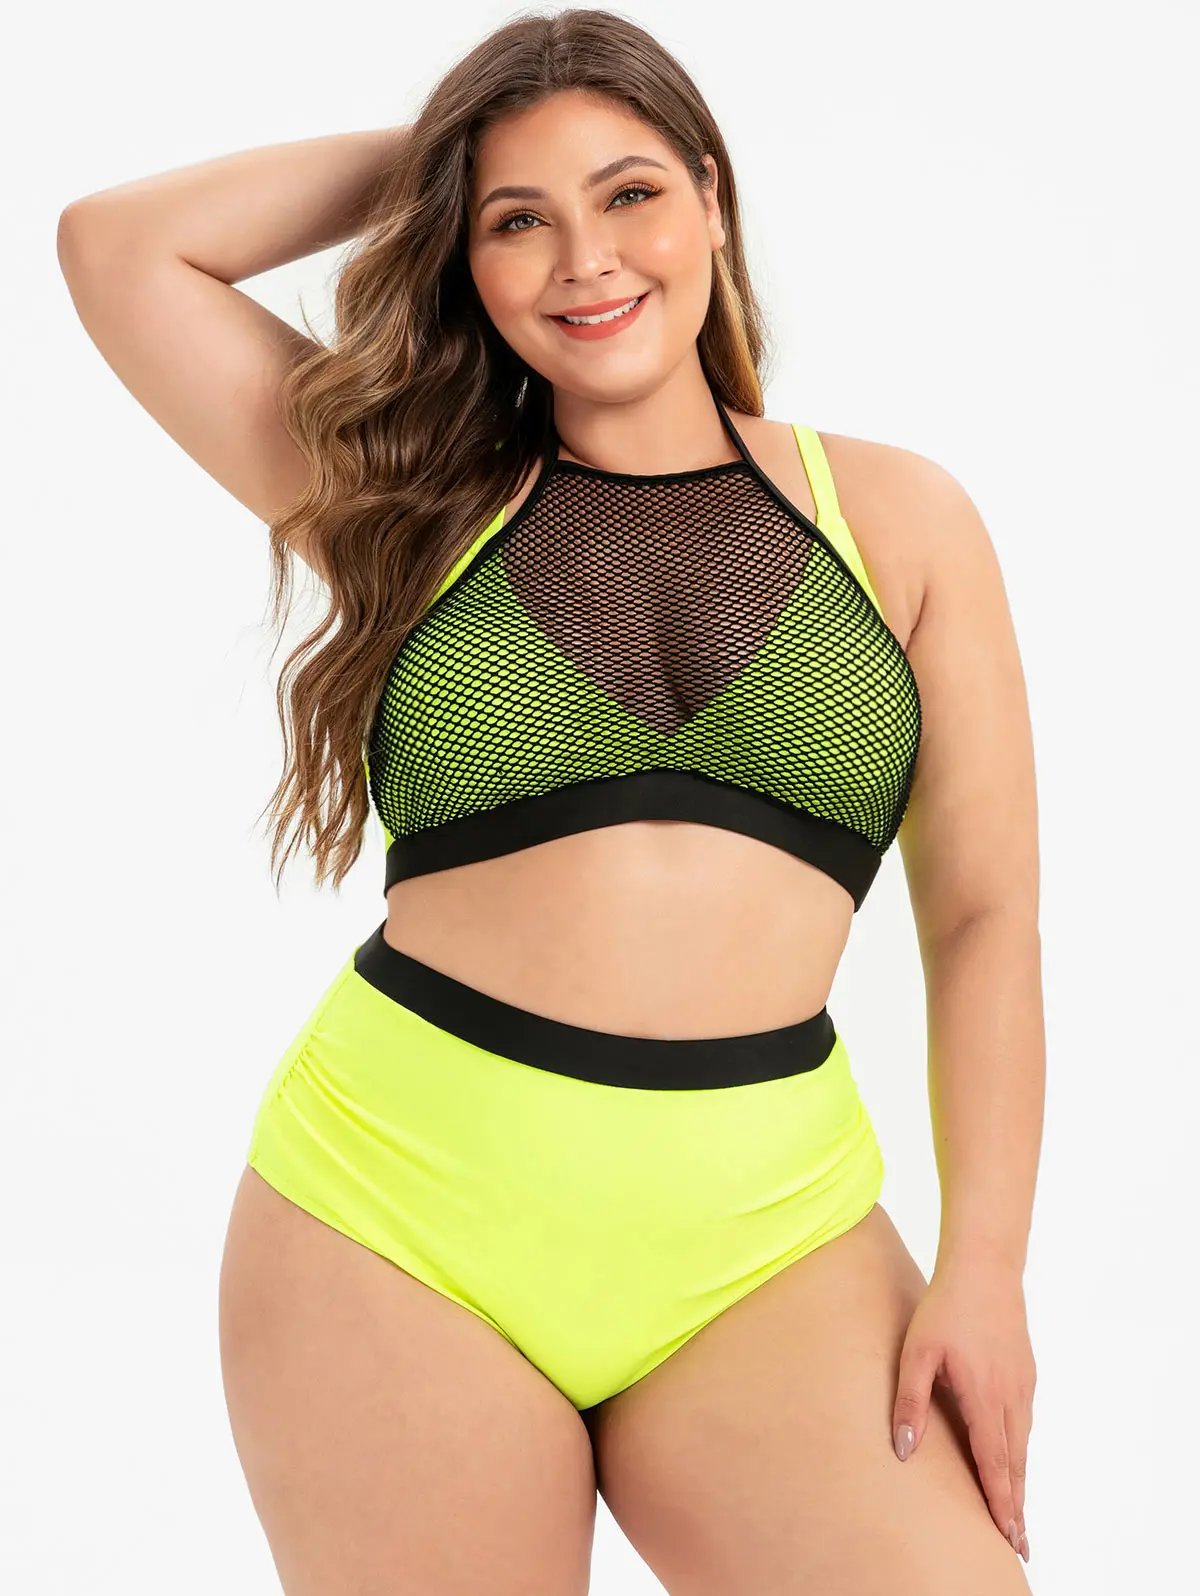 

Plus Size High Waisted Bikini Set Fishnet Overlay Ruched Neon Sportly Push Up Swimsuit Women Beachwear Biquini Two Piece Suits